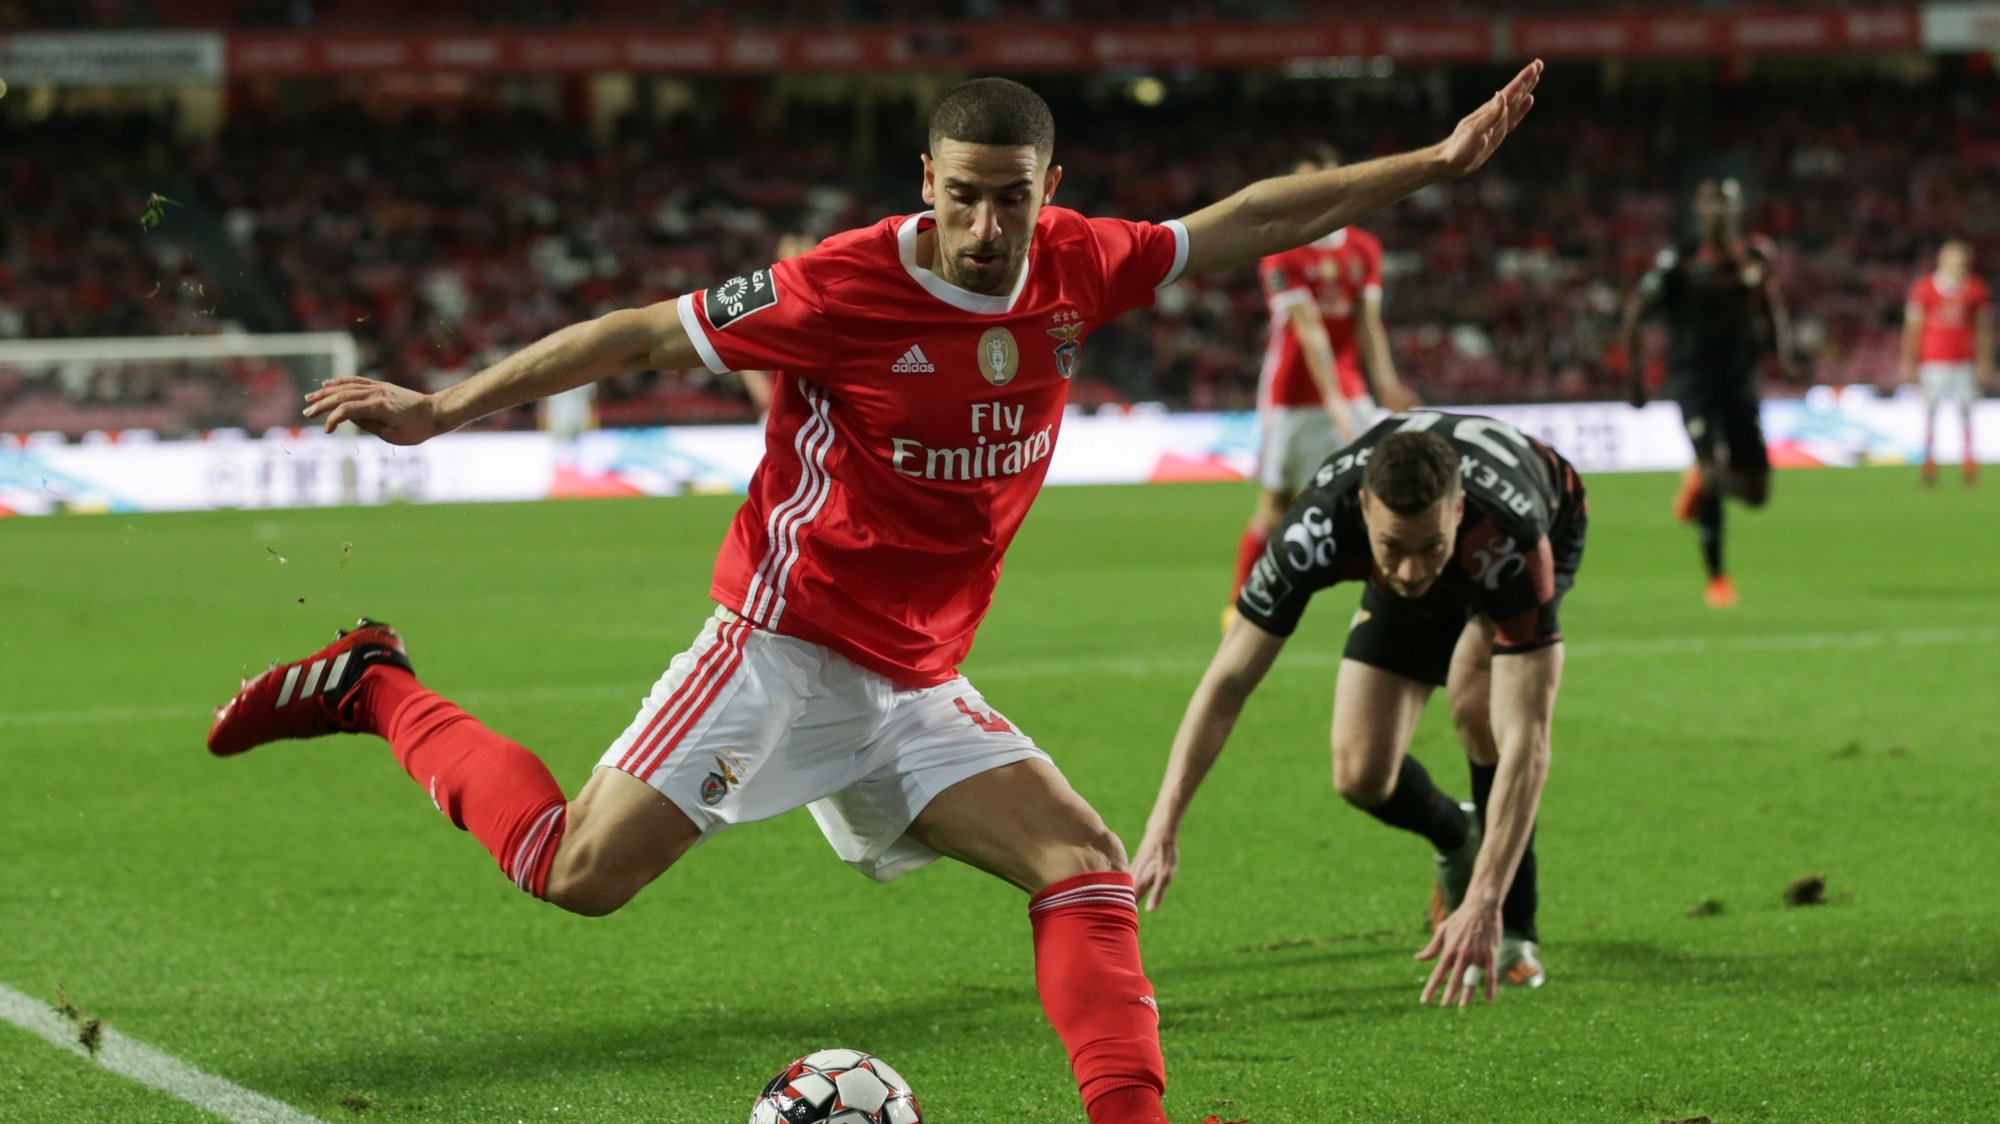 SL Benfica&#039;s player Adel Taarabt in action during their first league soccer match against Moreirense held at the Luz stadium in Lisbon, Portugal, 02nd March 2020. TIAGO PETINGA/LUSA